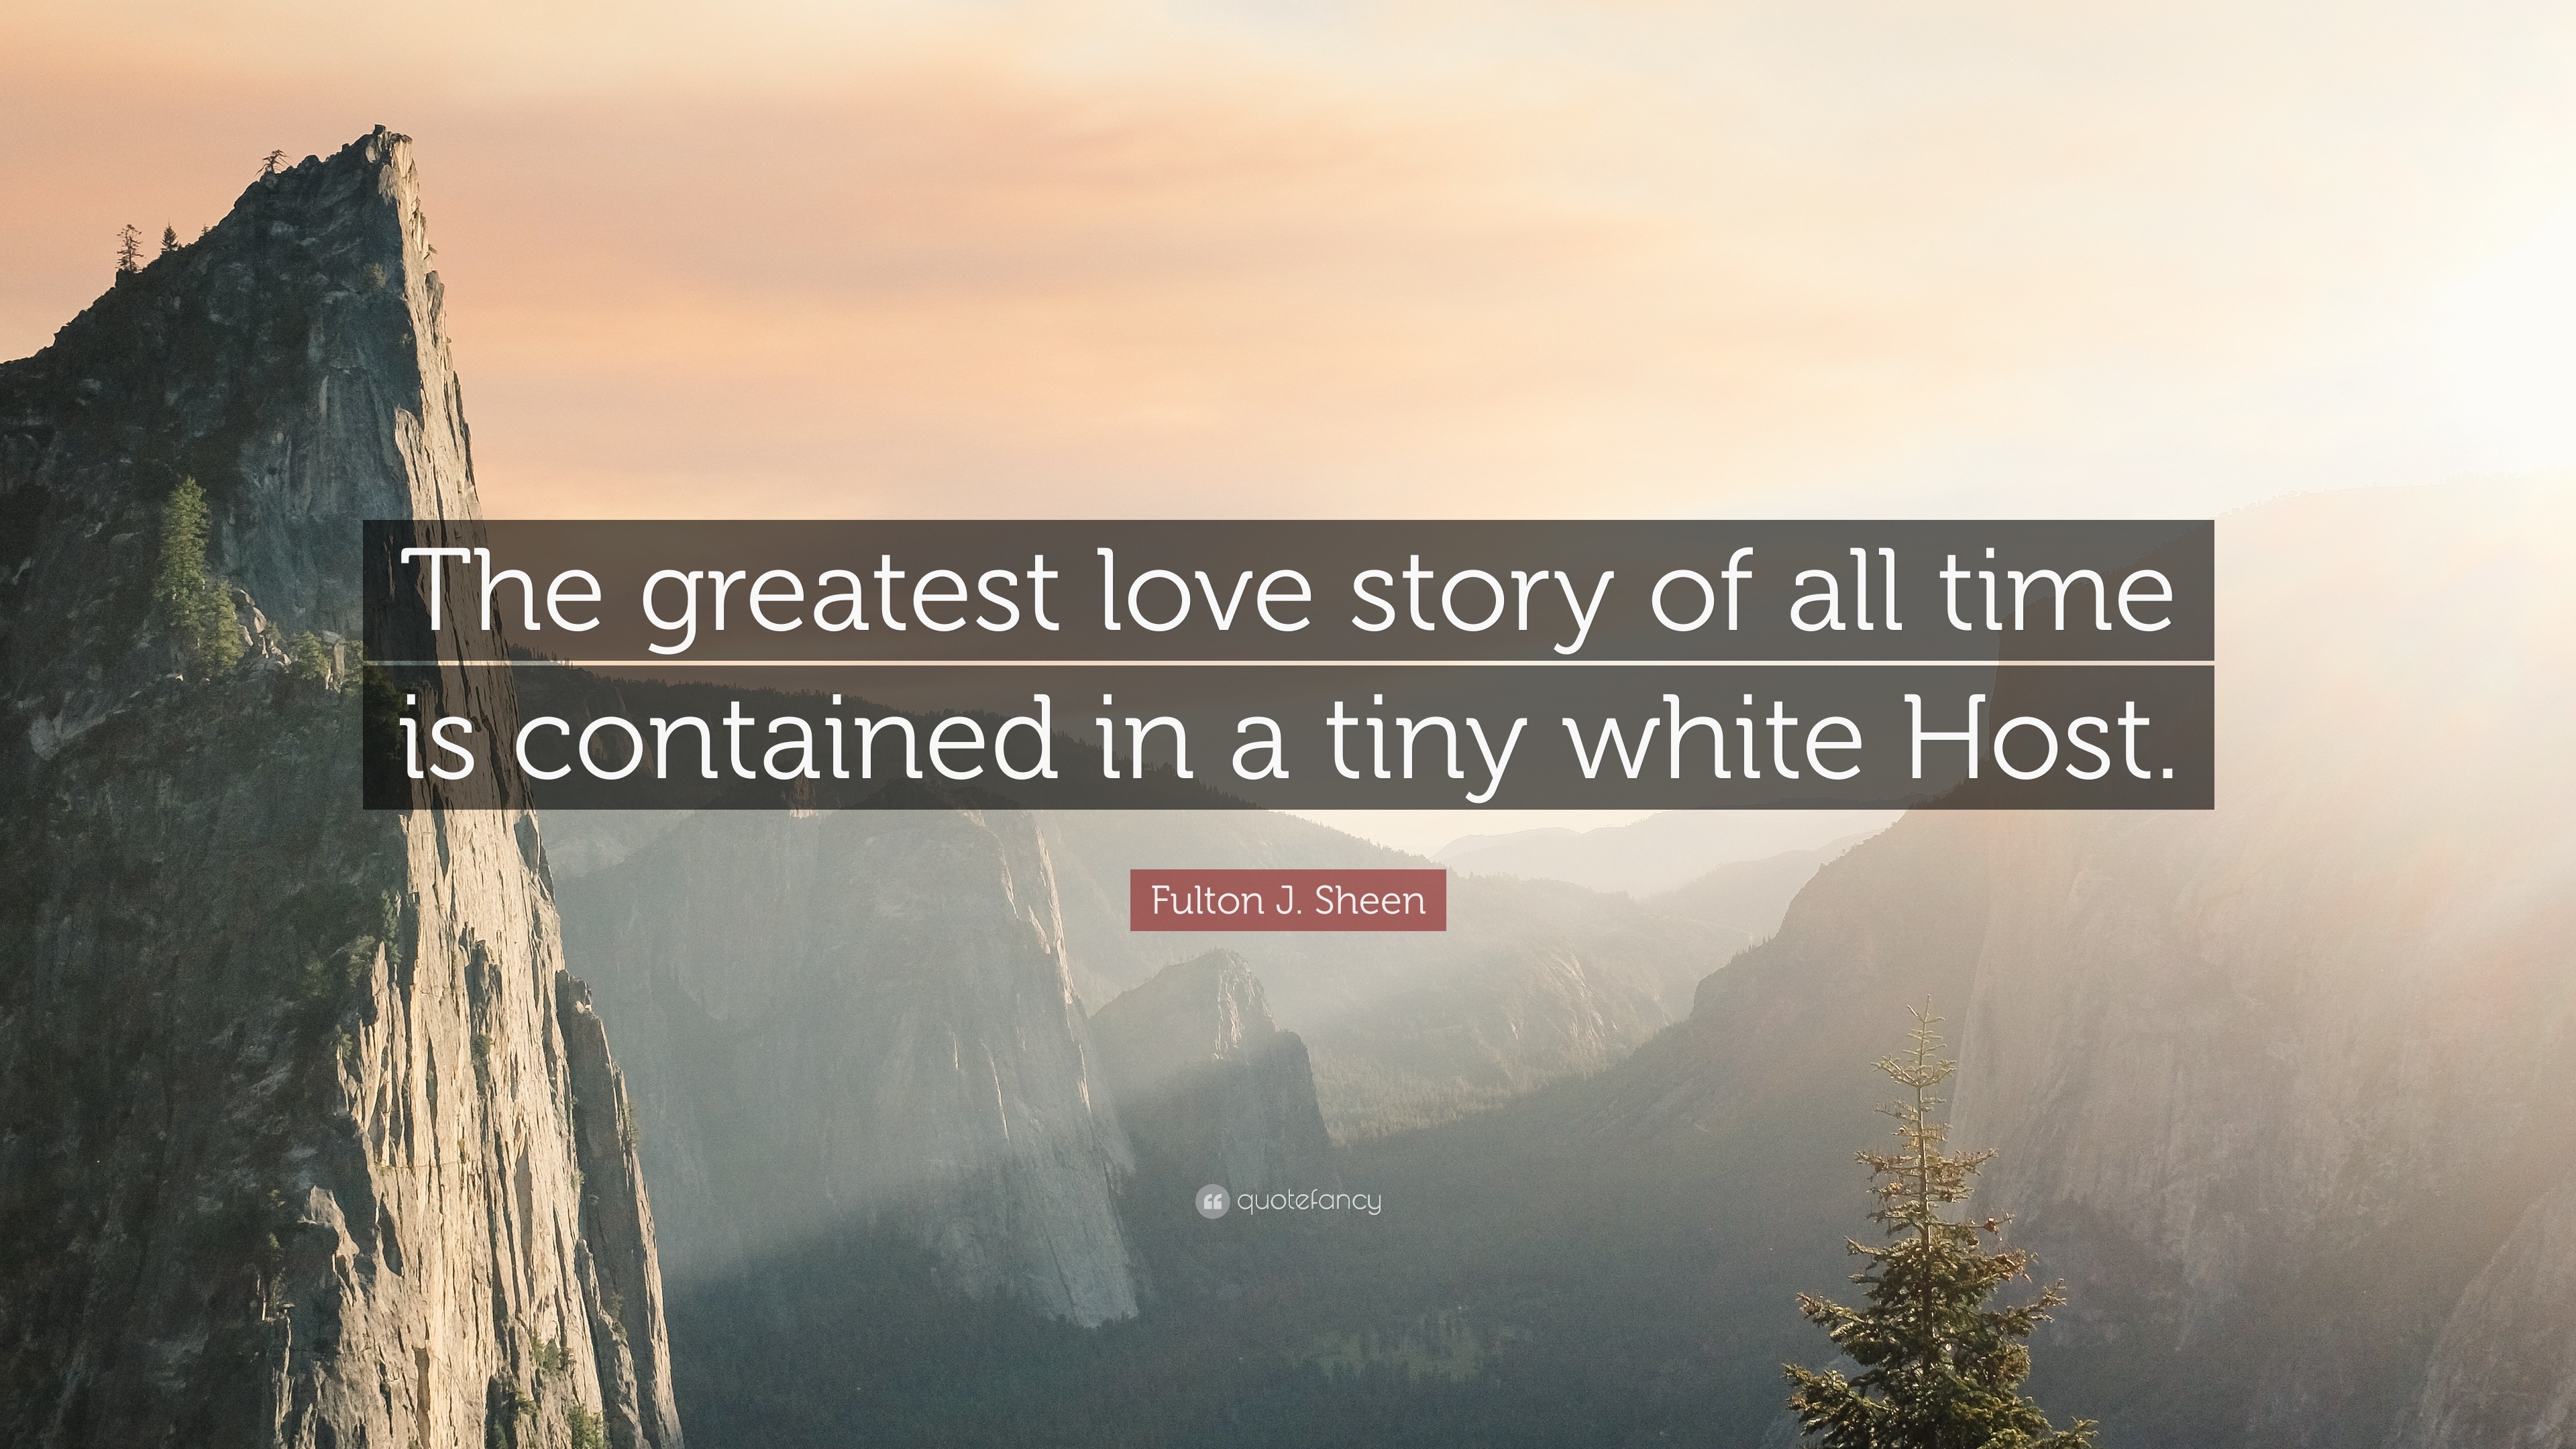 Fulton J Sheen Quote “The greatest love story of all time is contained